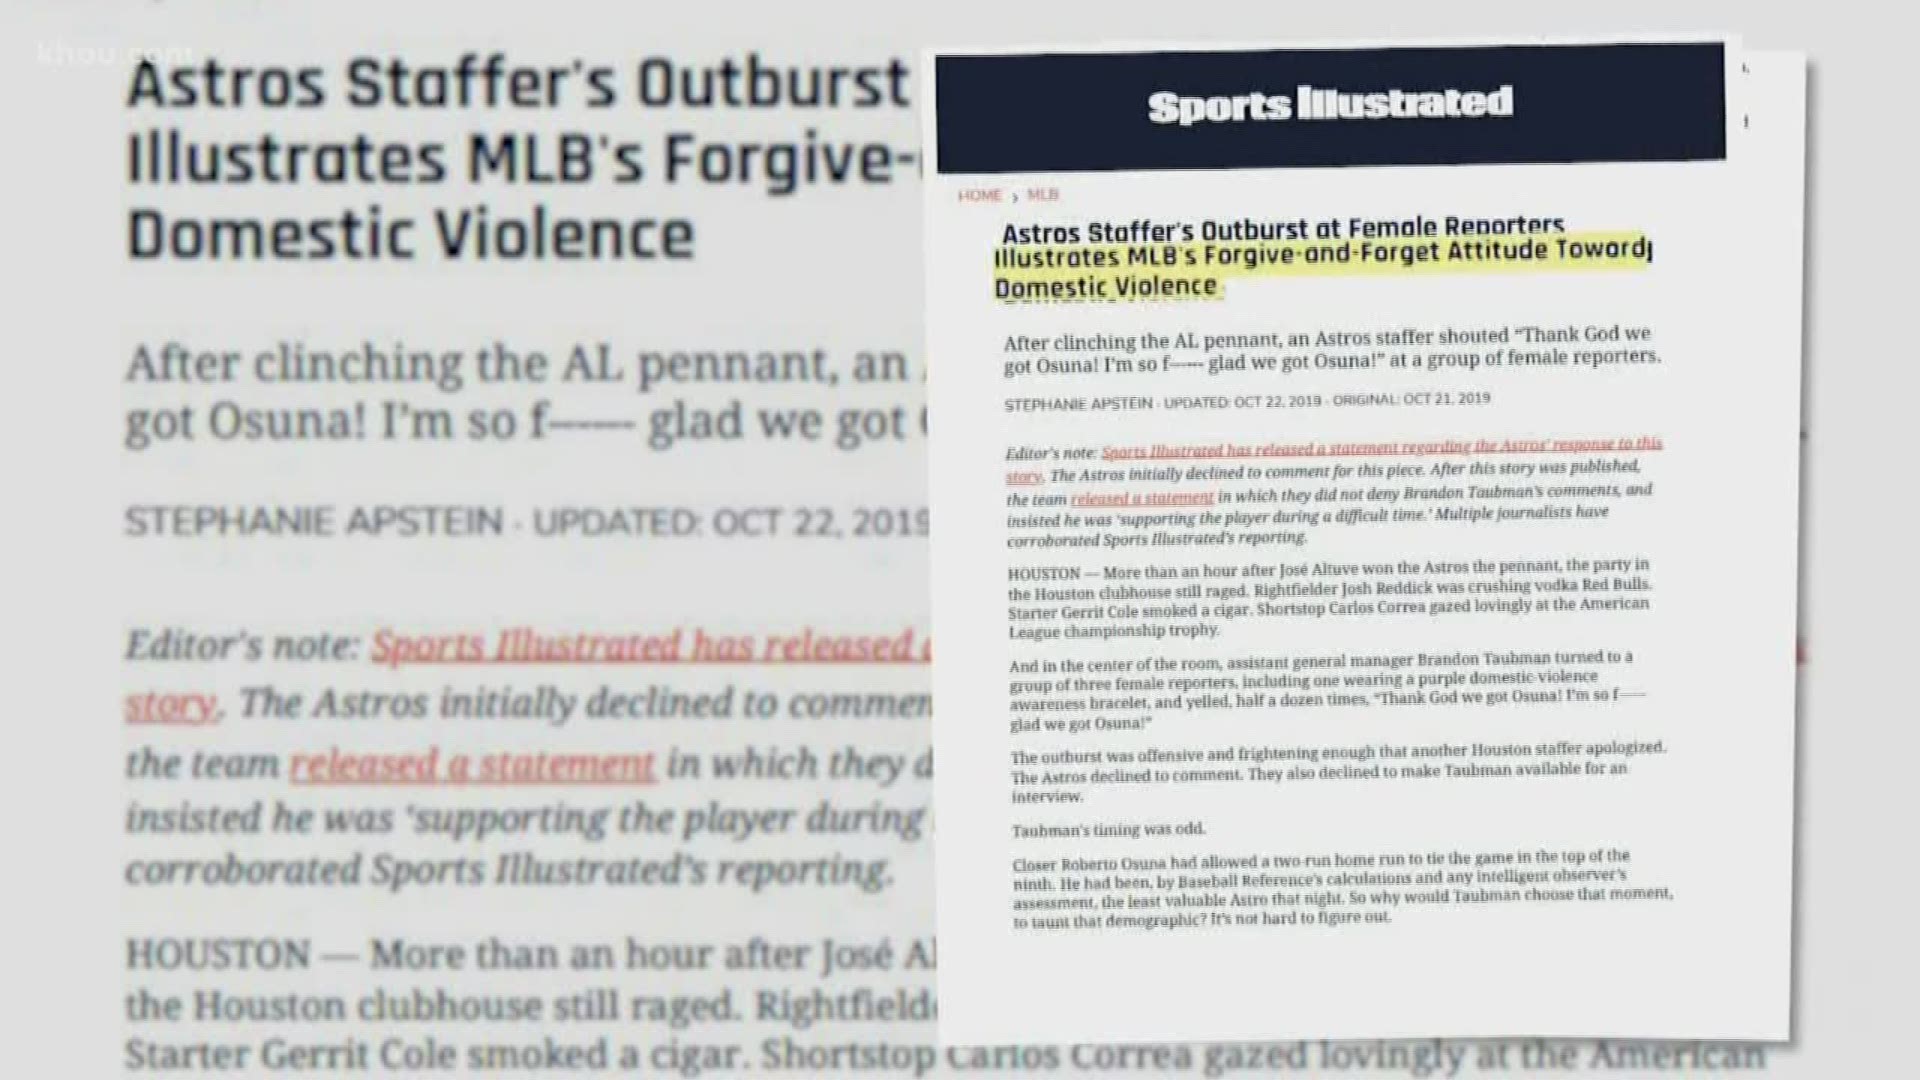 The Astros are making headlines because of drama off the field. A Sports Illustrated report claims an executive taunted female reporters after the team's ALCS win.